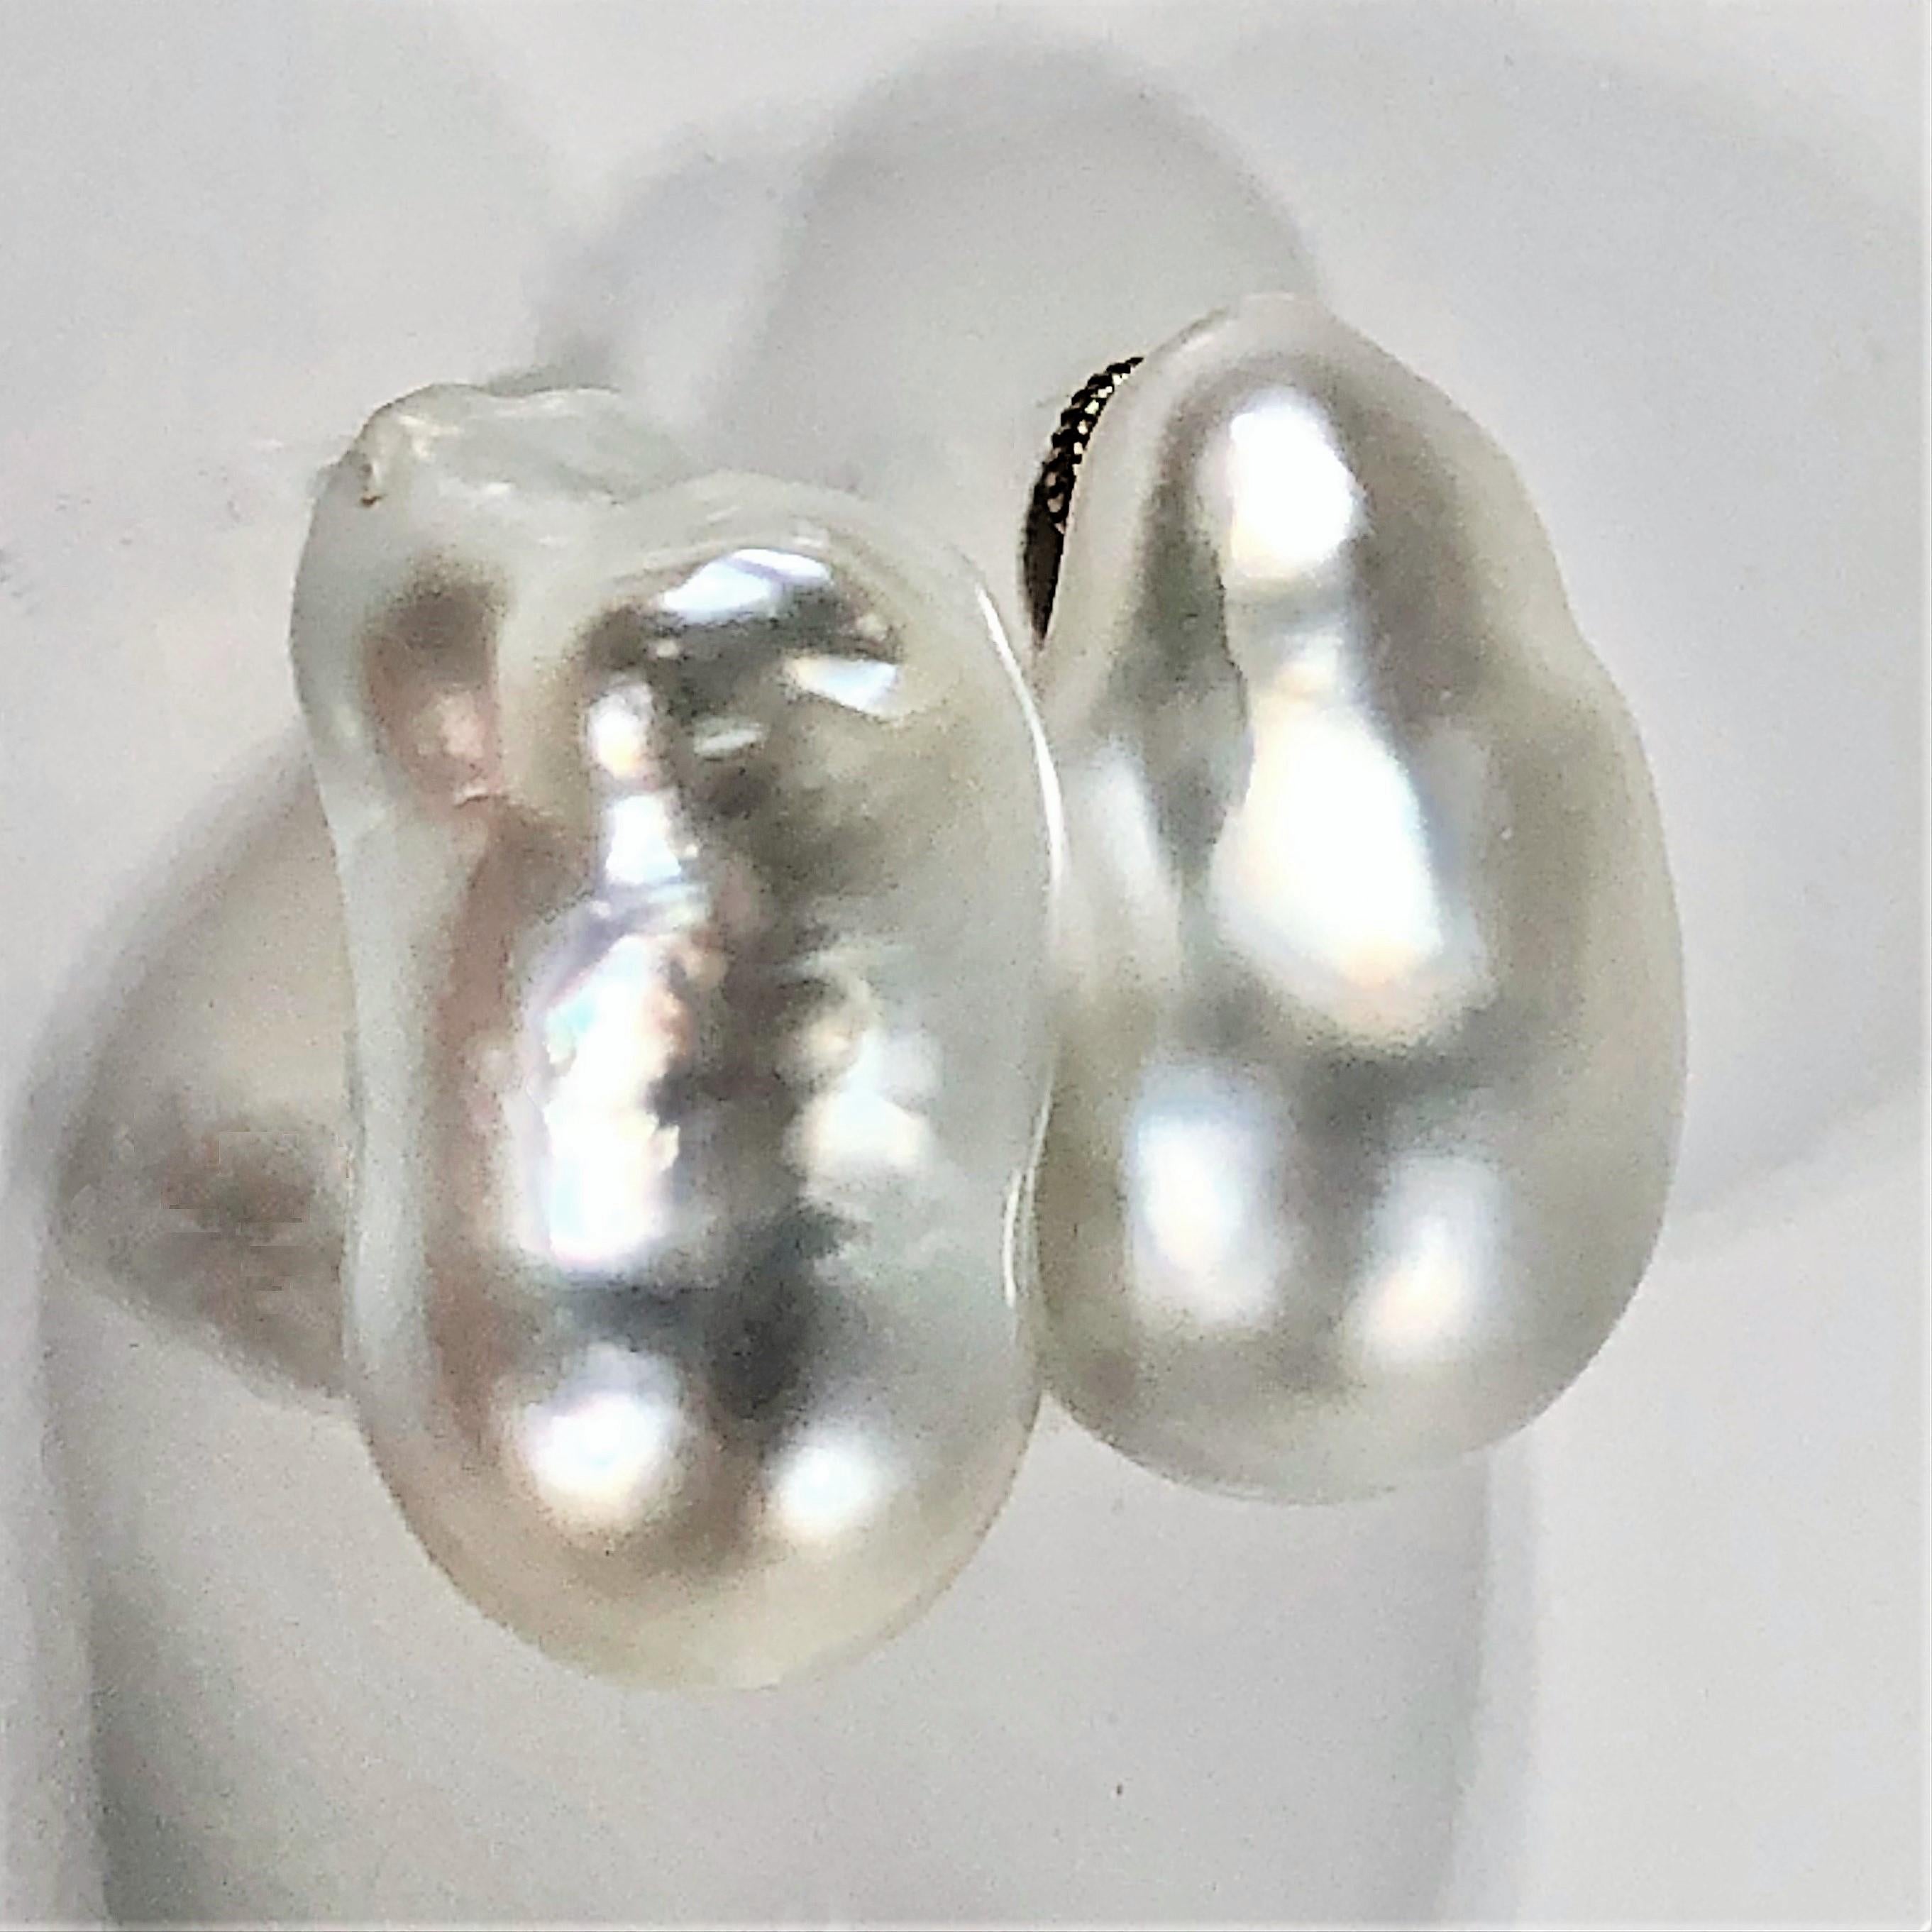 A pair of baroque pearl earrings measuring 27 mm long and 13mm wide, with finely made,
heavy duty 18 karat yellow gold backs. Classic and simple these earrings 
go with everything in your wardrobe, and add a unique flair.